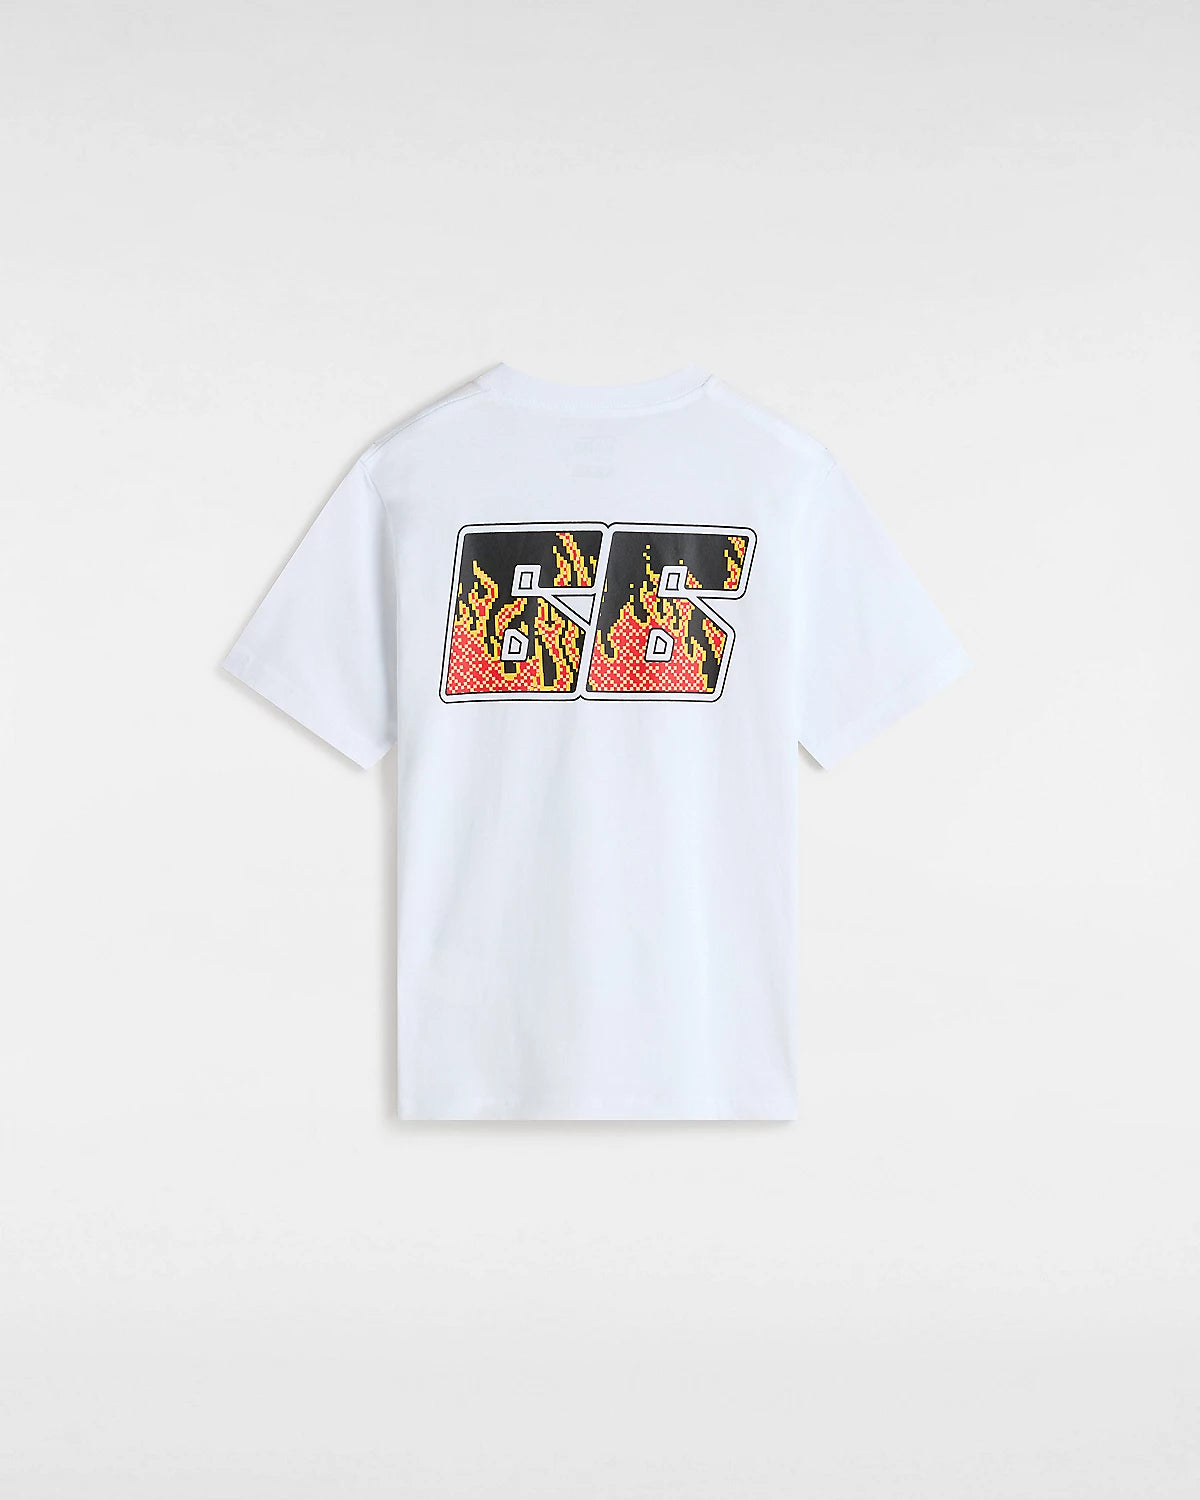 VANS - DIGI FLAMES SS YOUTH TEE - WHITE